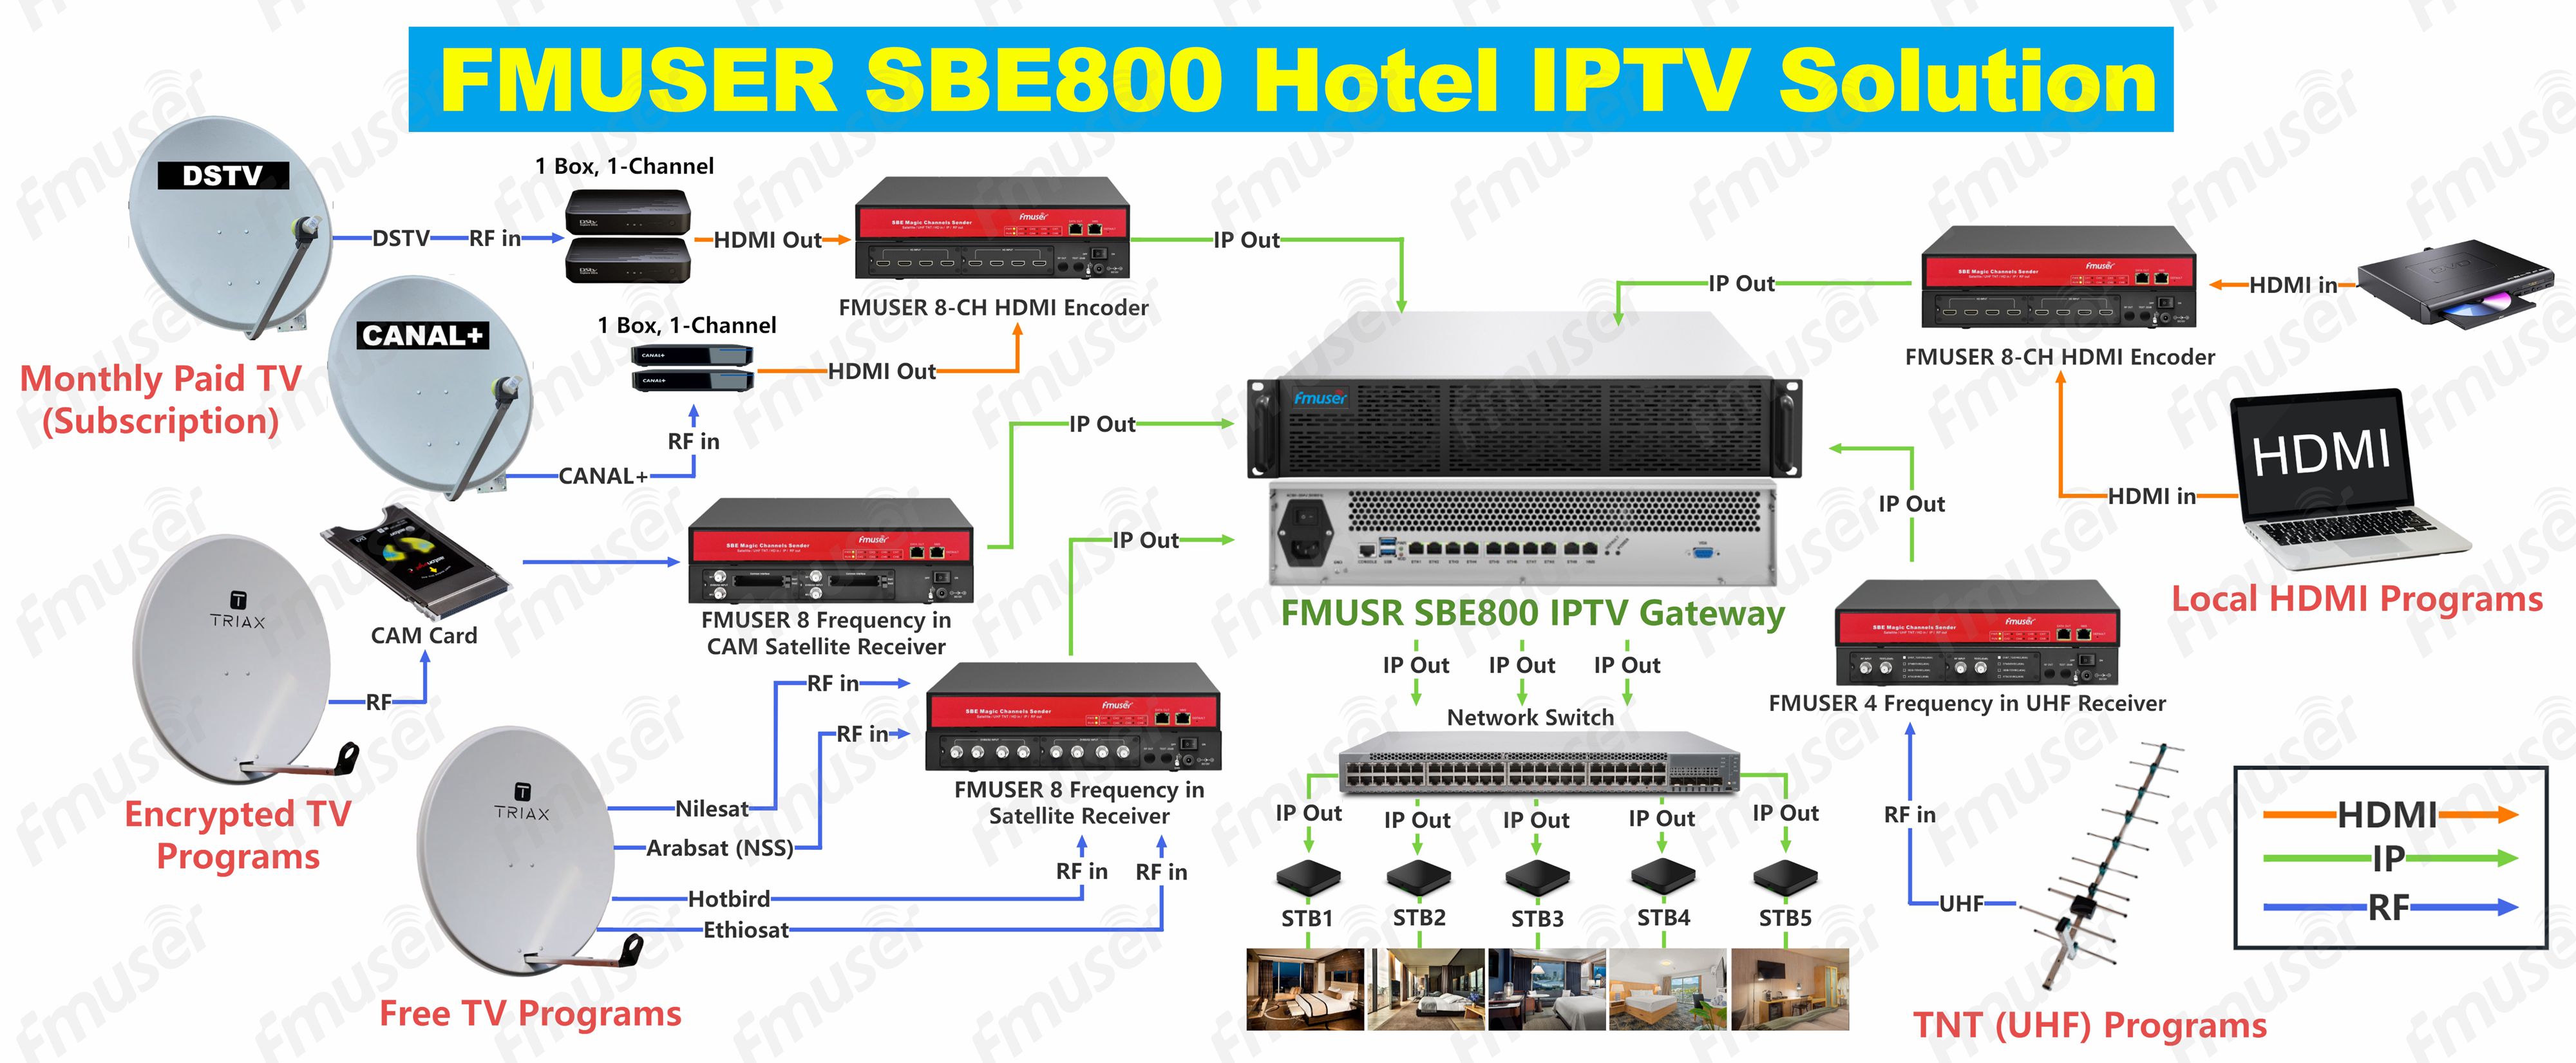 FMUSER's hotel IPTV solution is compatible with versatile content sources, including local HDMI, UHF, Satellite Signals (paid TV programs like Canal+ and DSTV, as well as free TV programs like Arabsat, Ethiosat, Hotbird, and Nilesat).